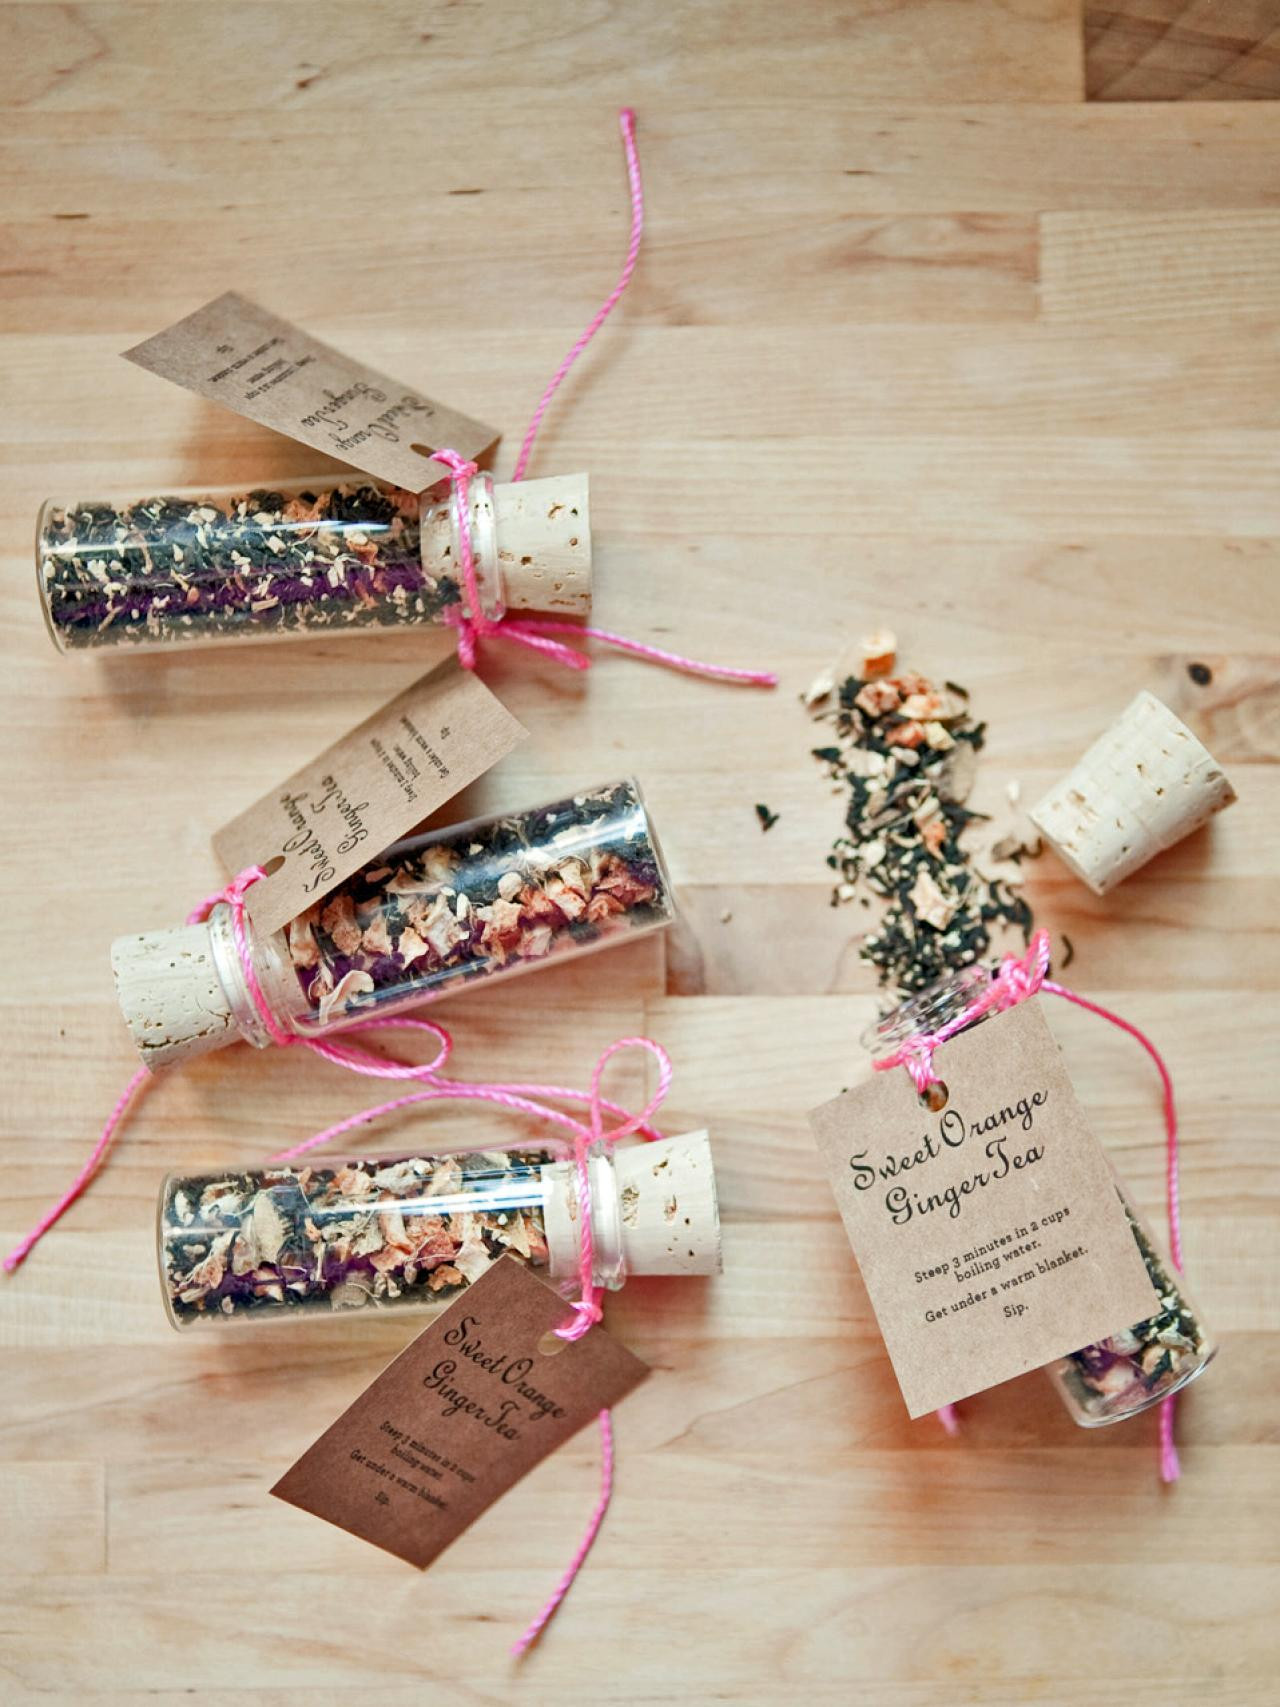 Holiday Party Gift Ideas
 30 Festive DIY Holiday Party Favors